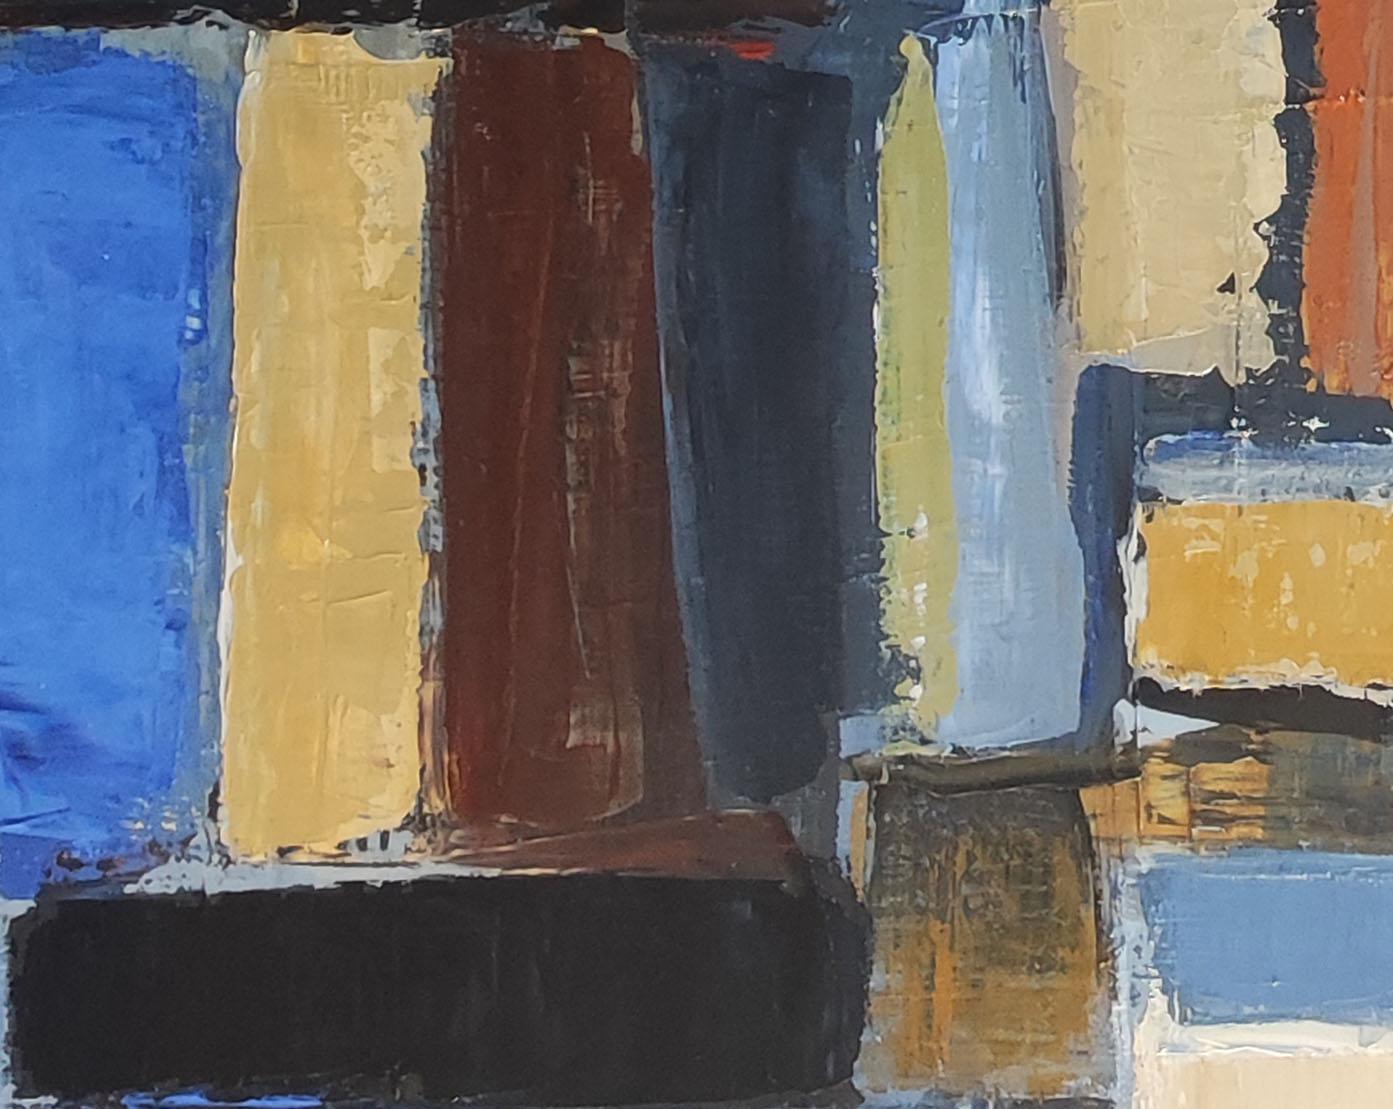 library 2, colors books in library, abstract, expressionism, oil on canvas 10